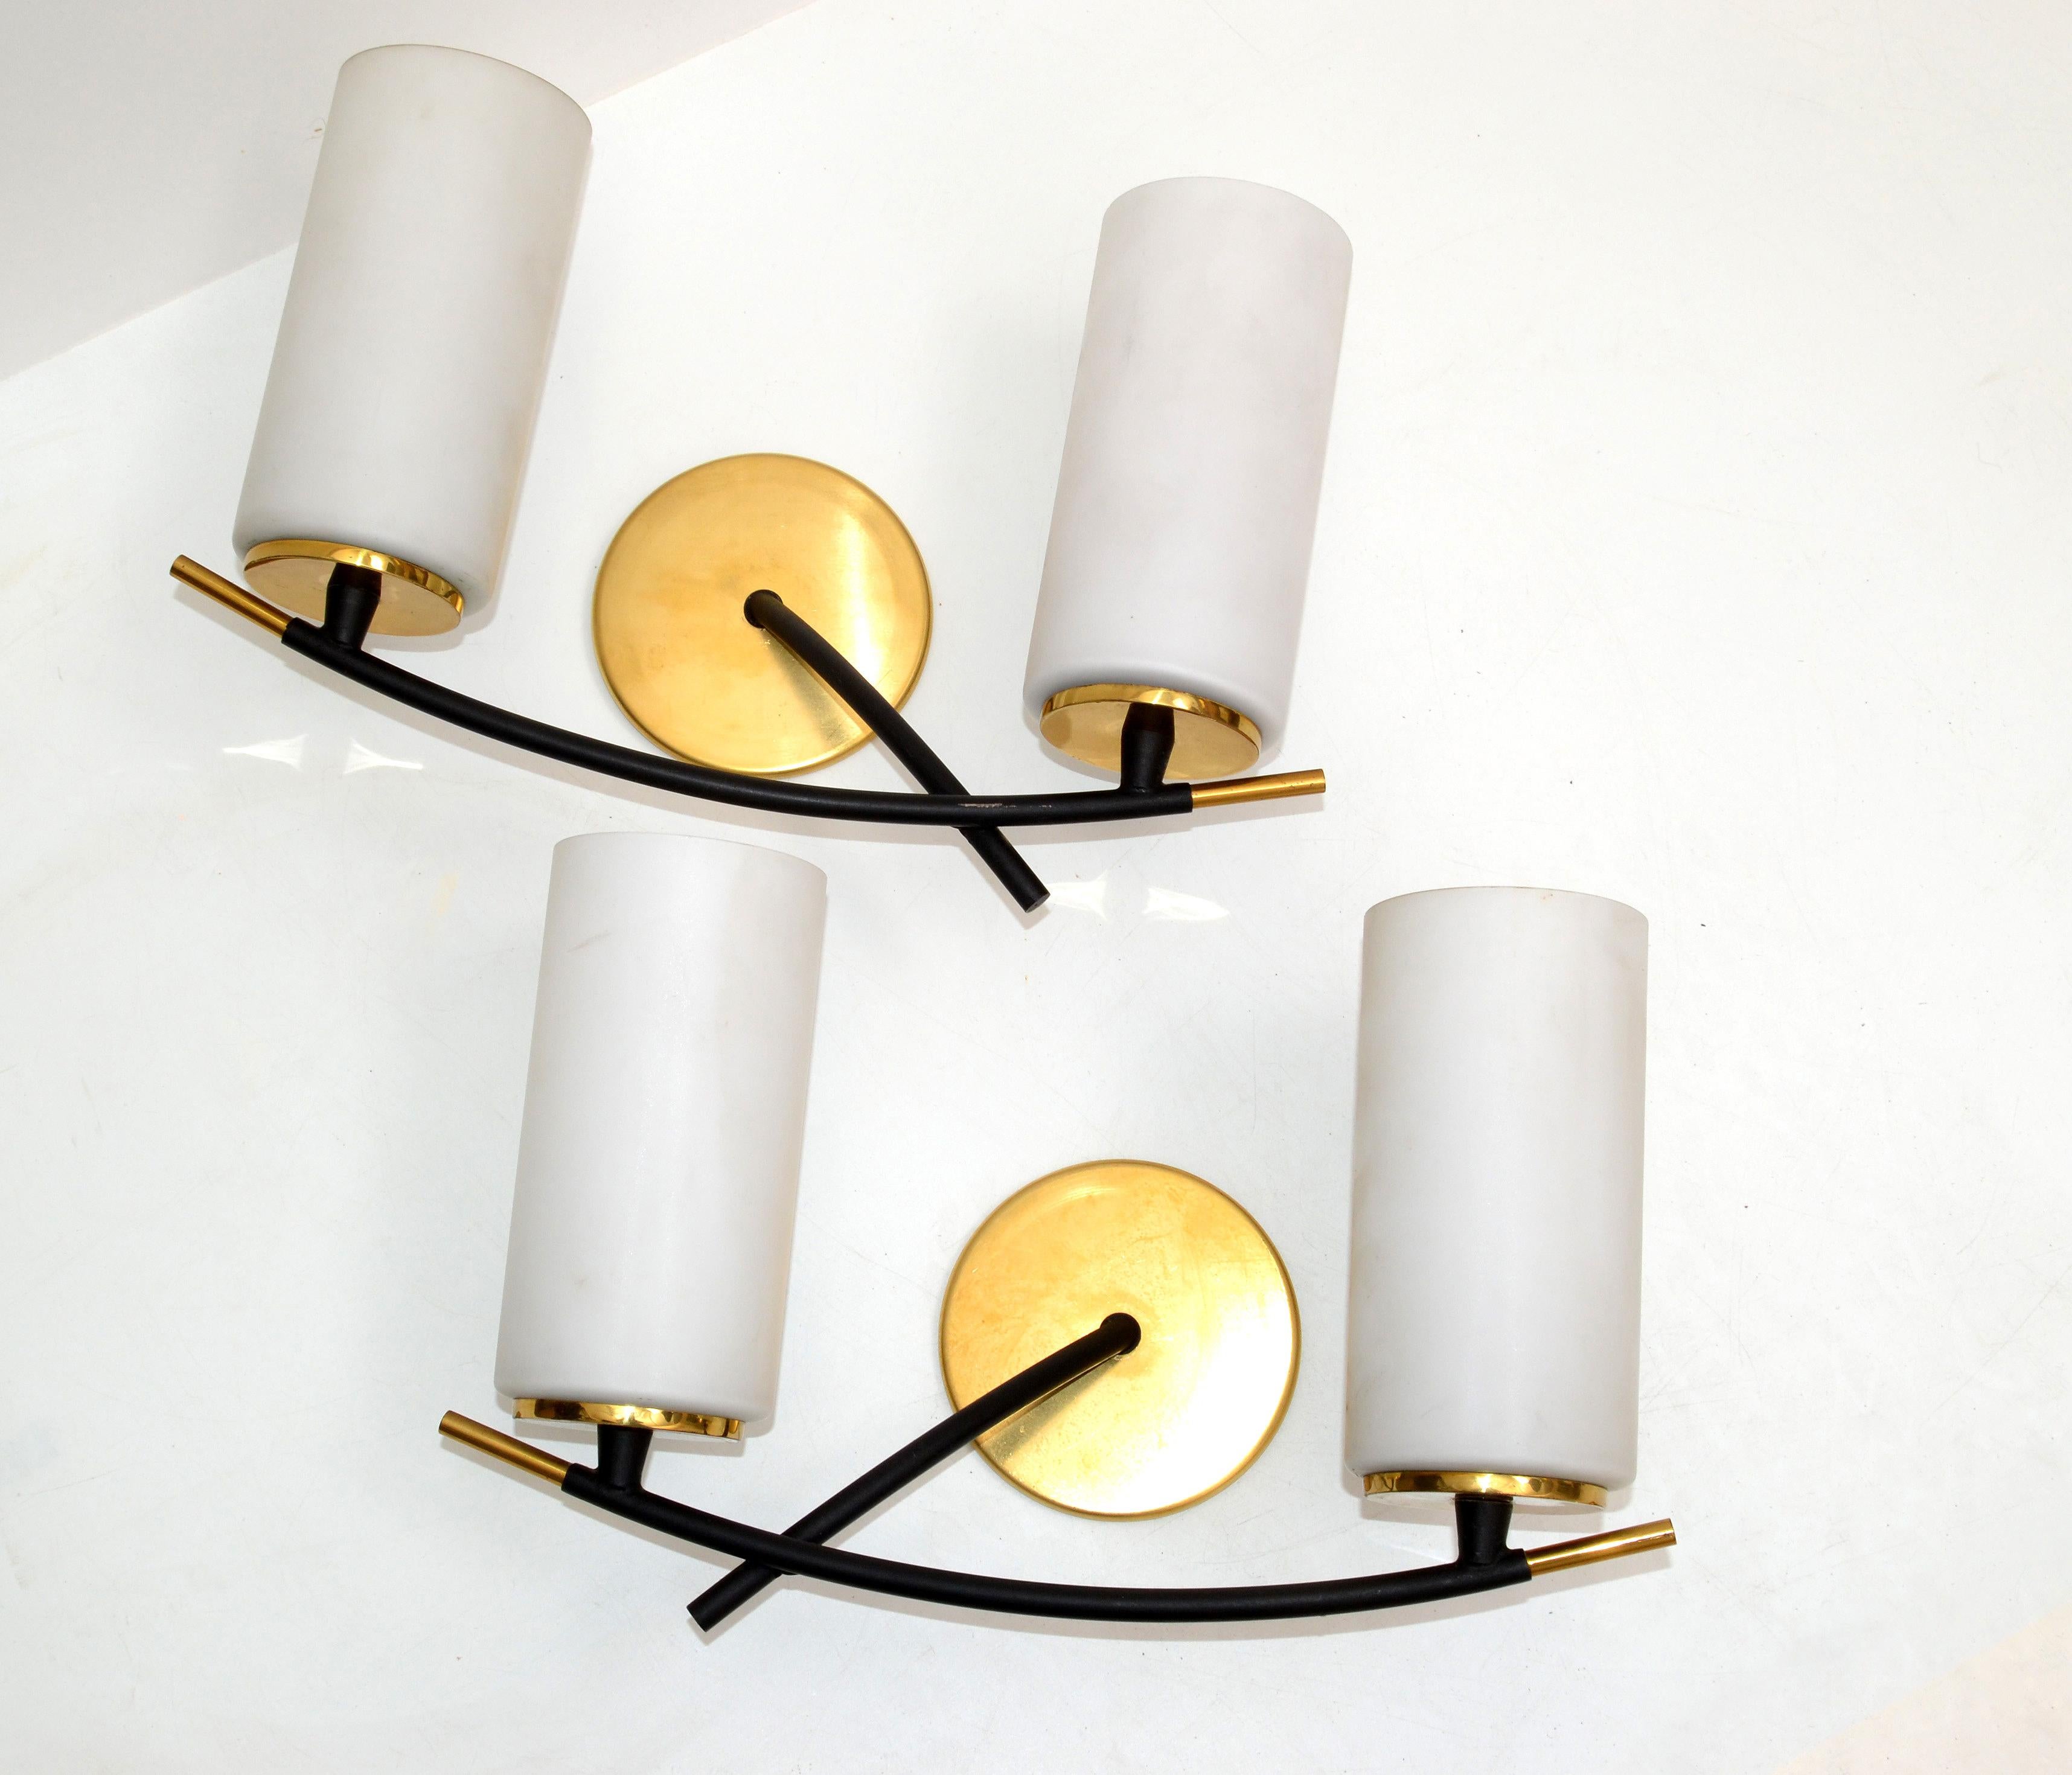 French Maison Arlus 2 Light Sconce Brass Steel & Cylinder Opaline Shade Art Deco, Pair For Sale